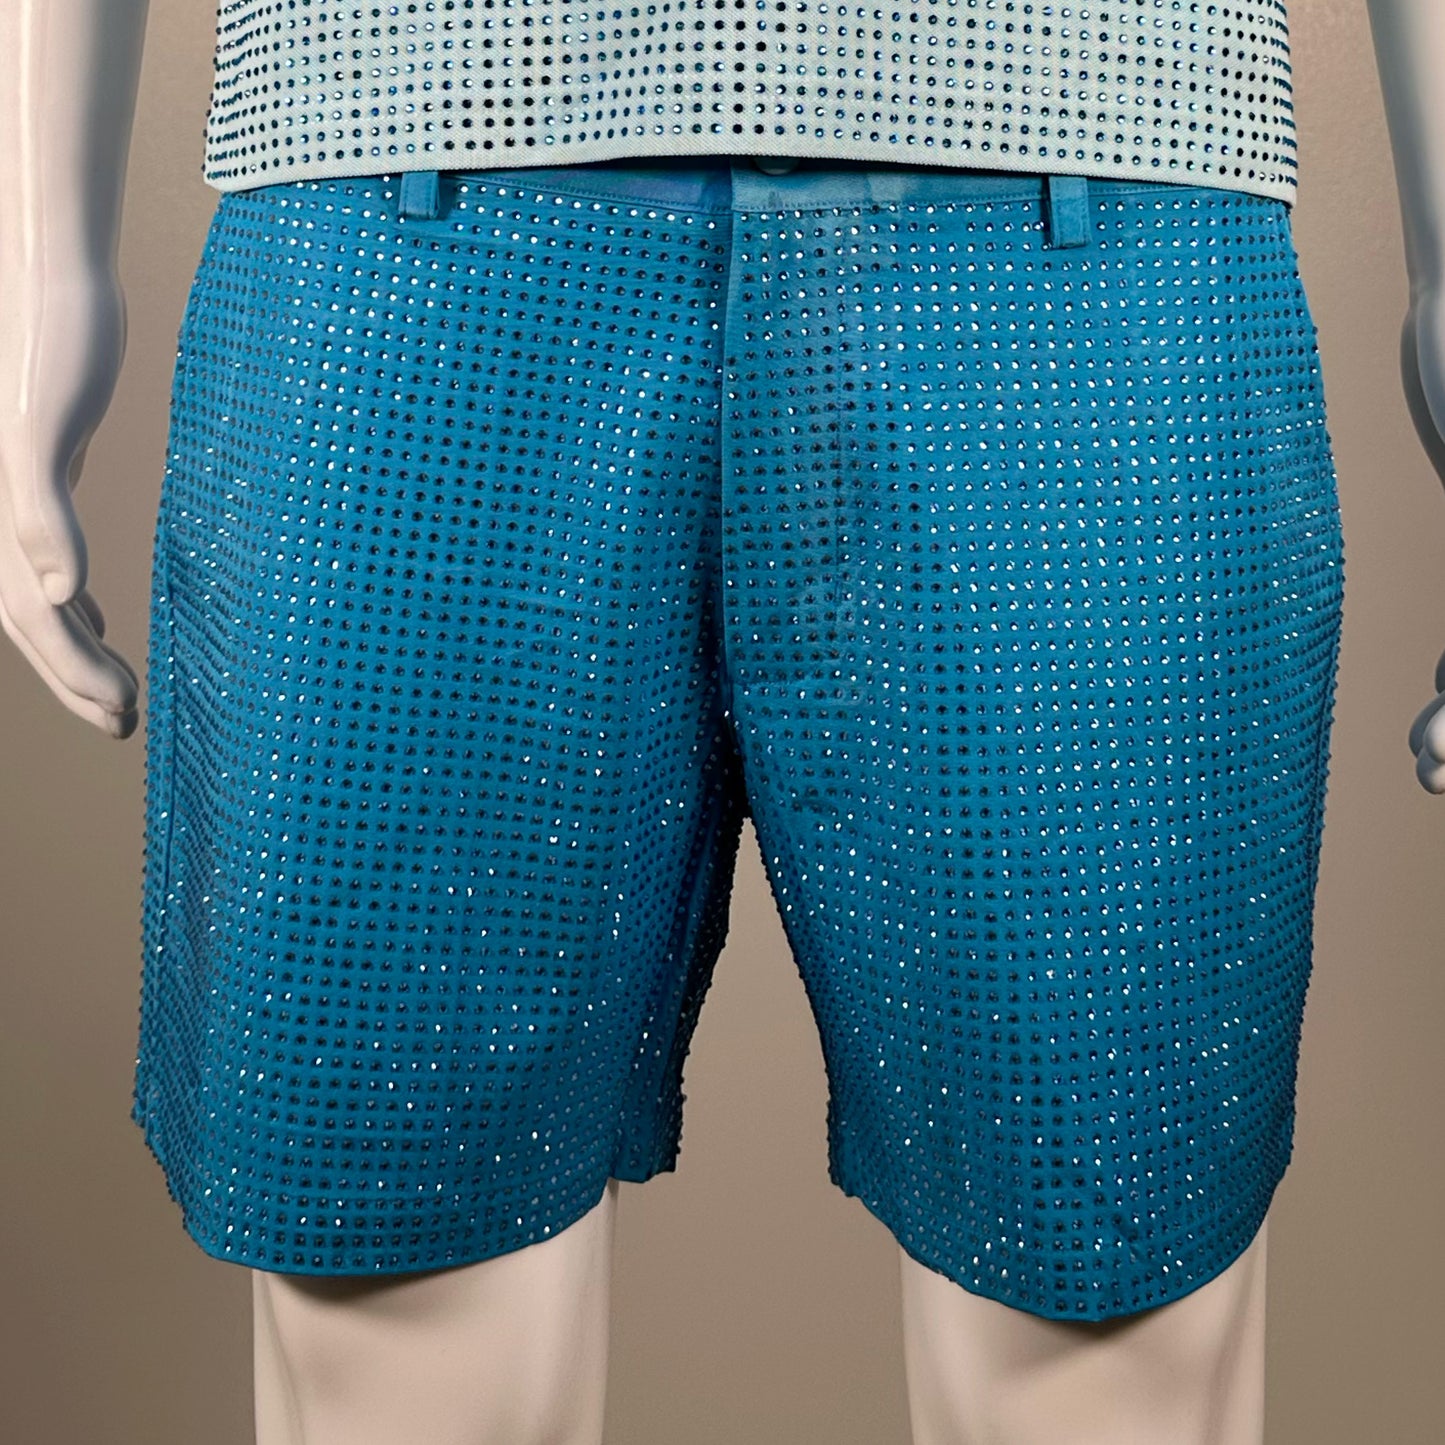 Clear Crystals on Lt. Blue Fabric Shorts